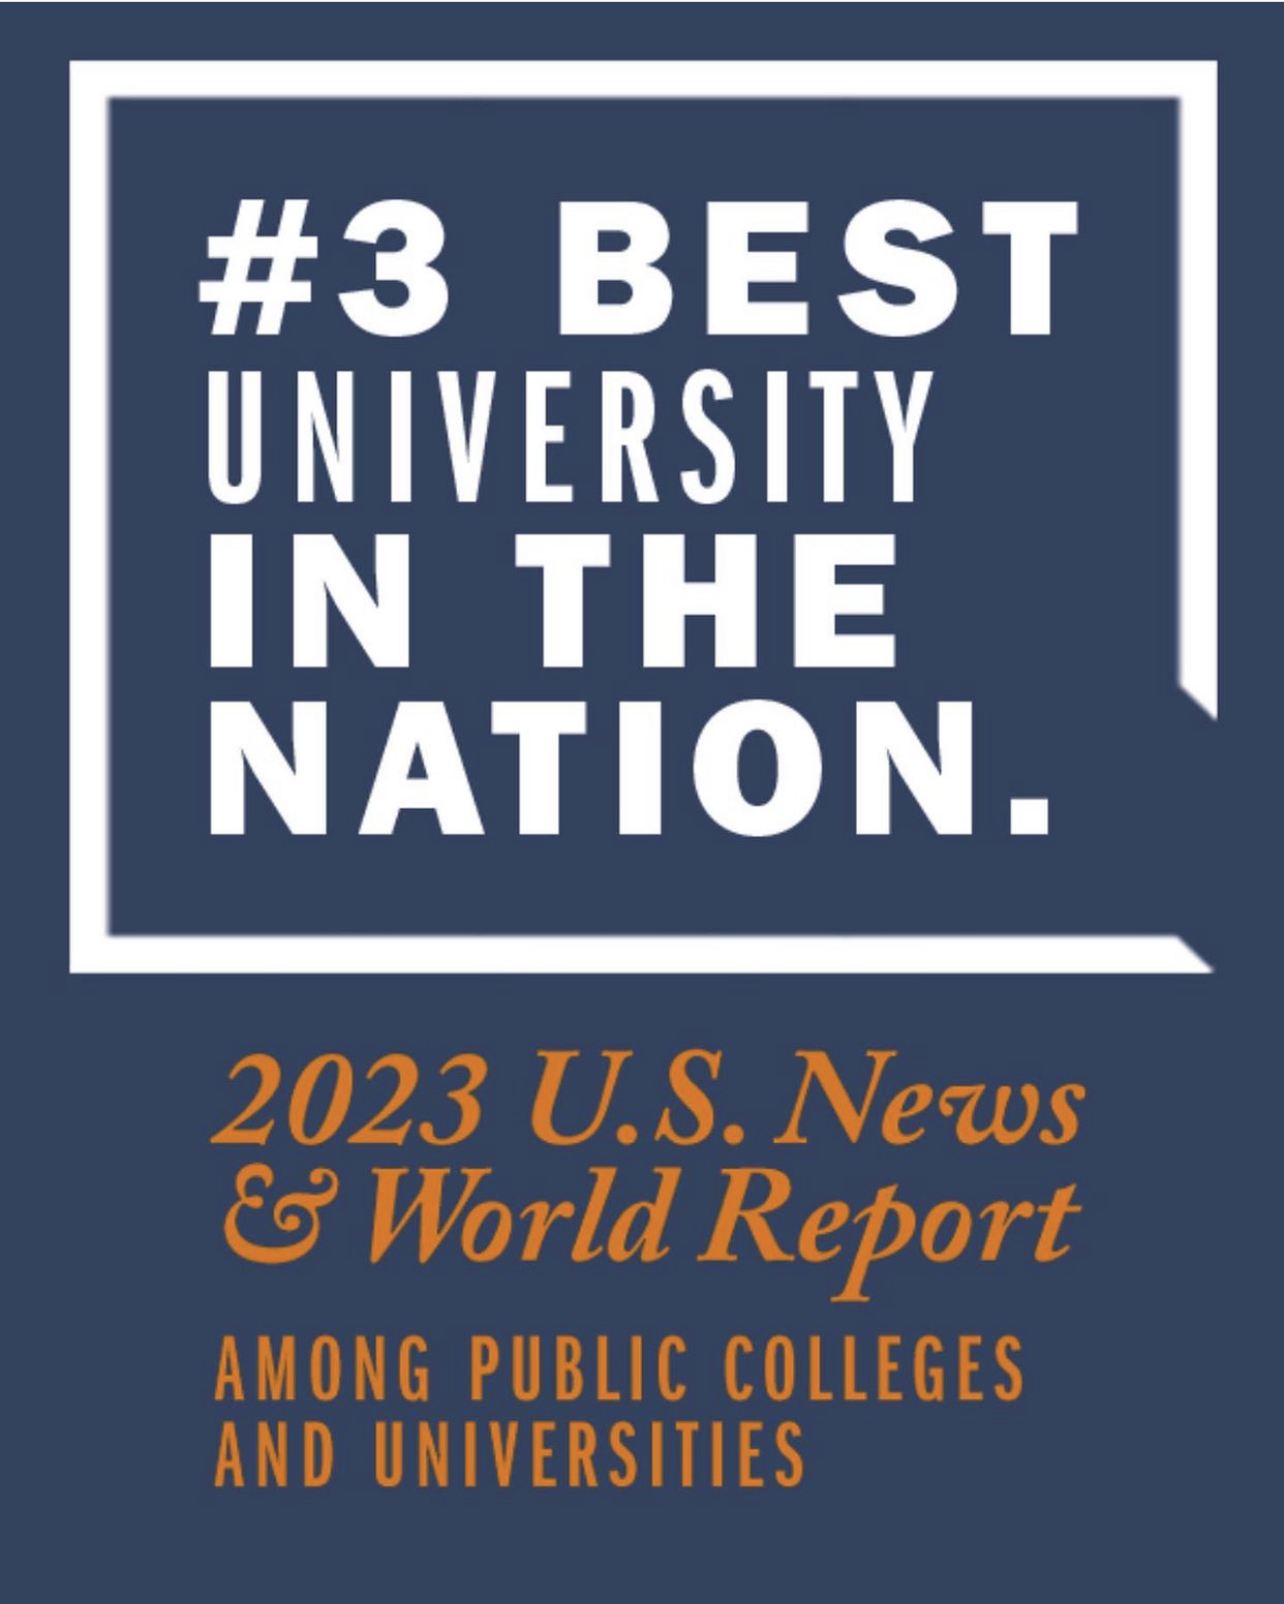 Number 3 best university in the nation among public colleges and universities, 2023 U.S. News and World Report